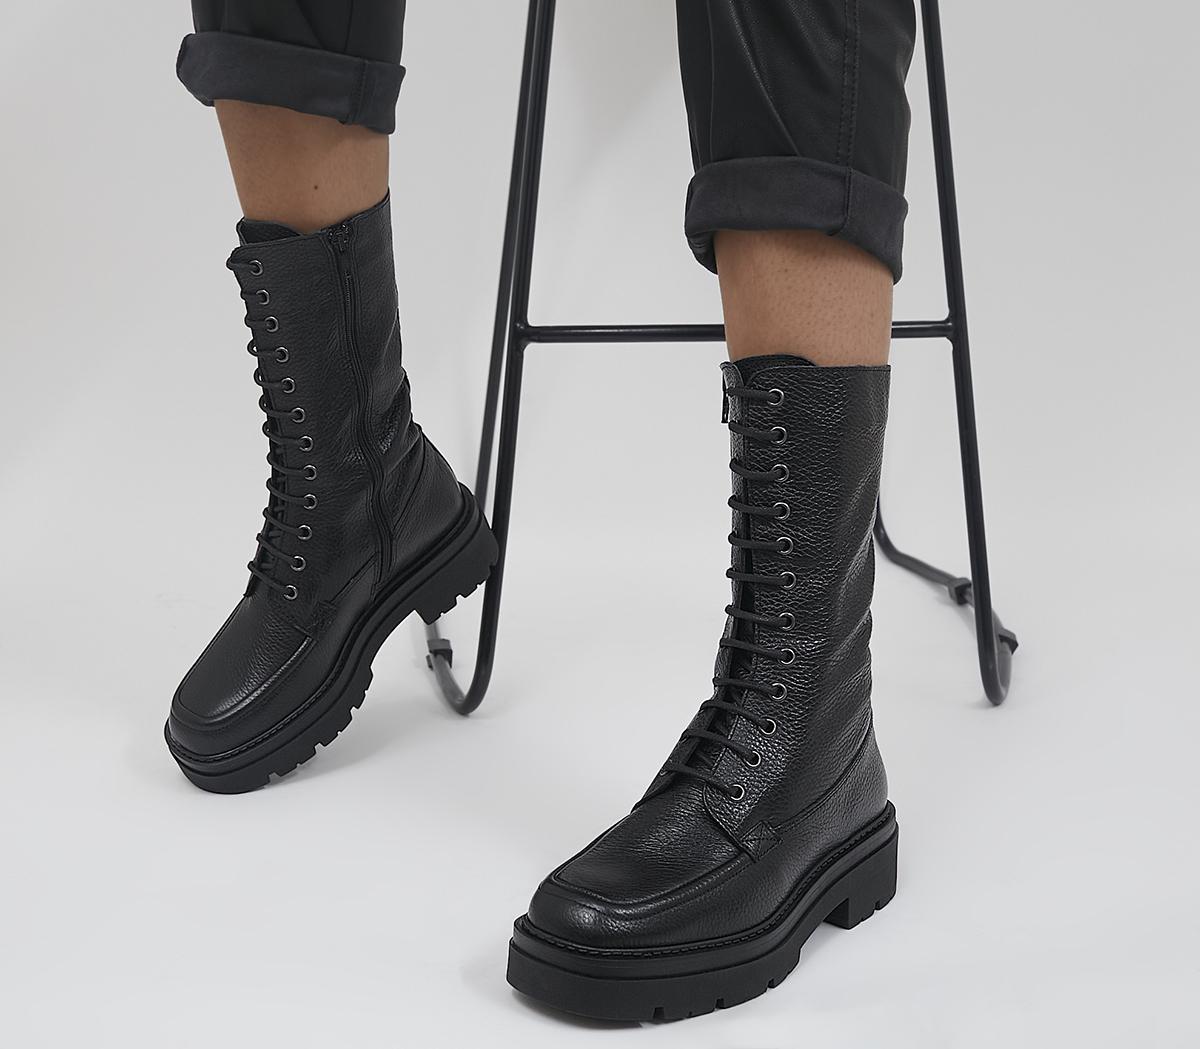 OfficeKeiling Lace Up BootsBlack Tumbled Leather